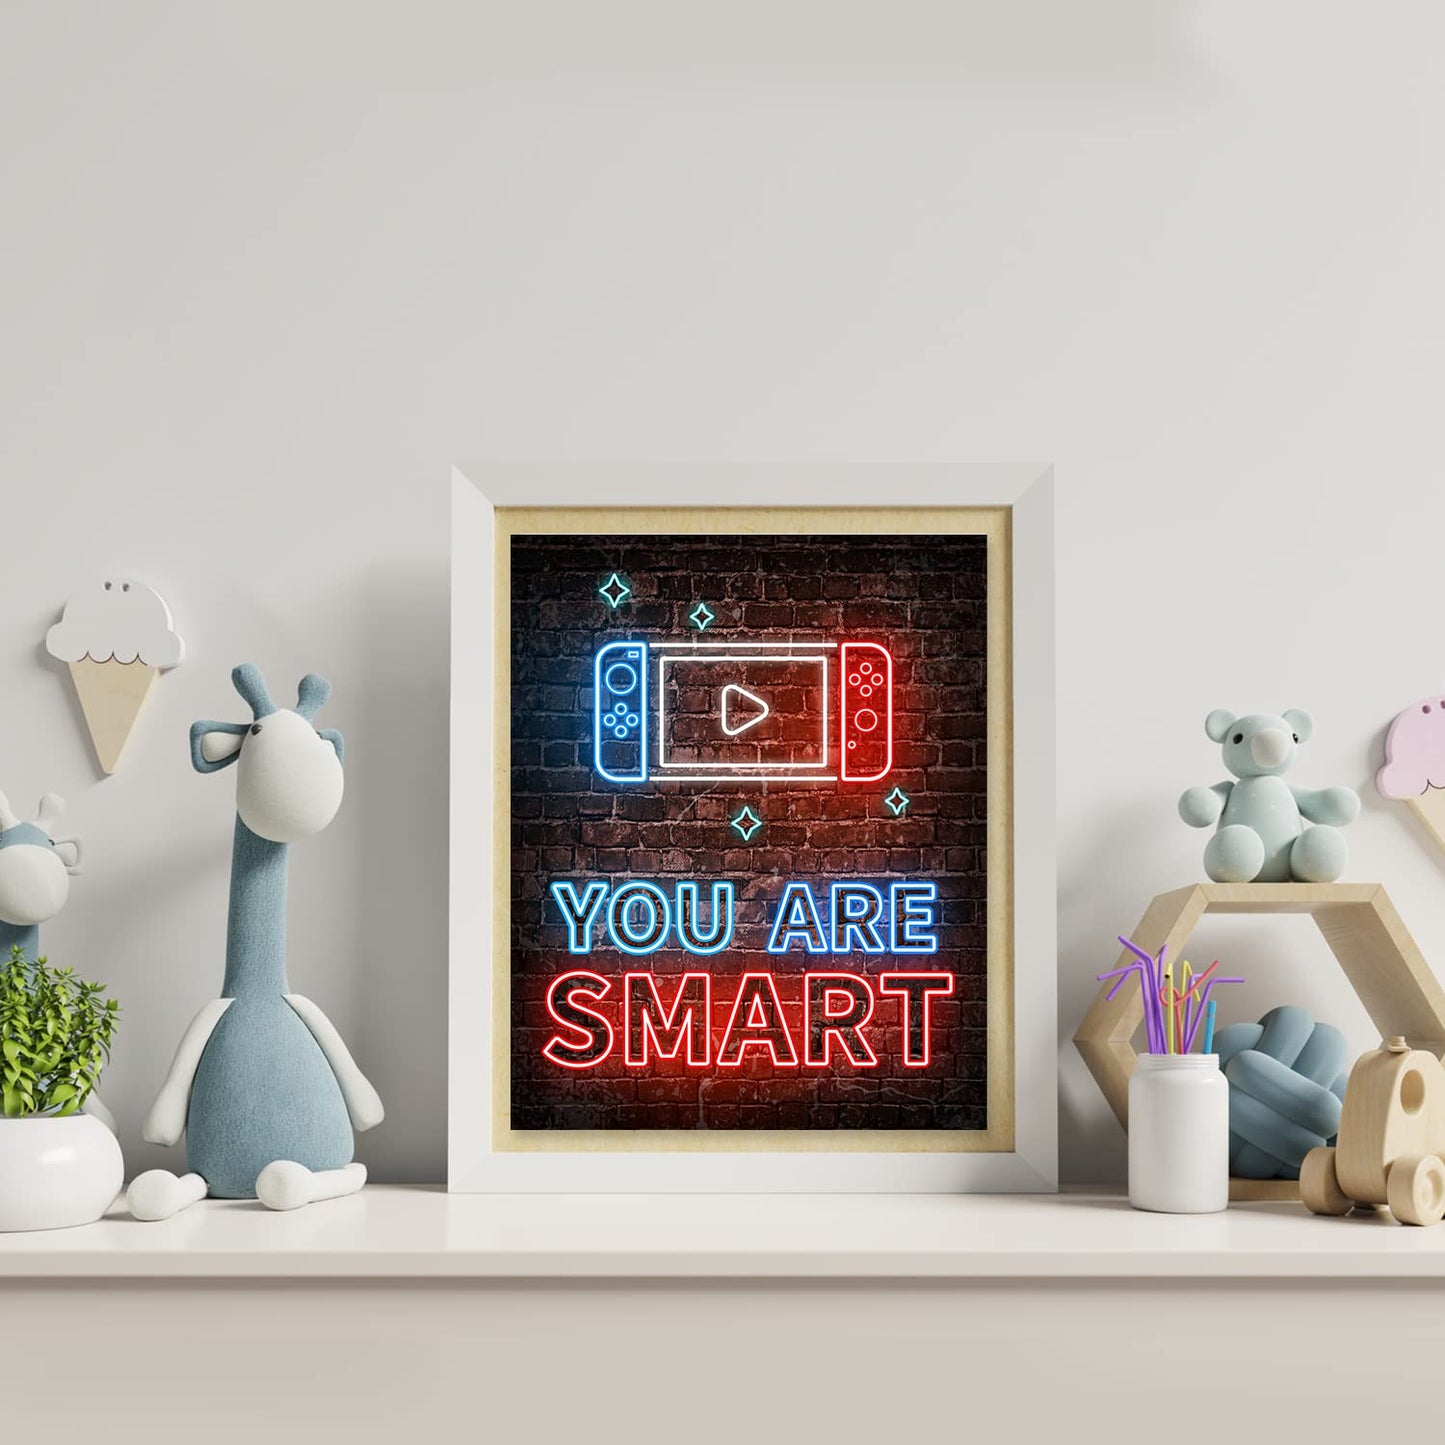 Neon Video Game Decor Set of 4(8"x10"), Boys Room Decorations for Bedroom, Encouragement Gaming Wall Art for Kids Boy Playroom Home Decor, gamer wall art, Teen boy bedroom, No Frames